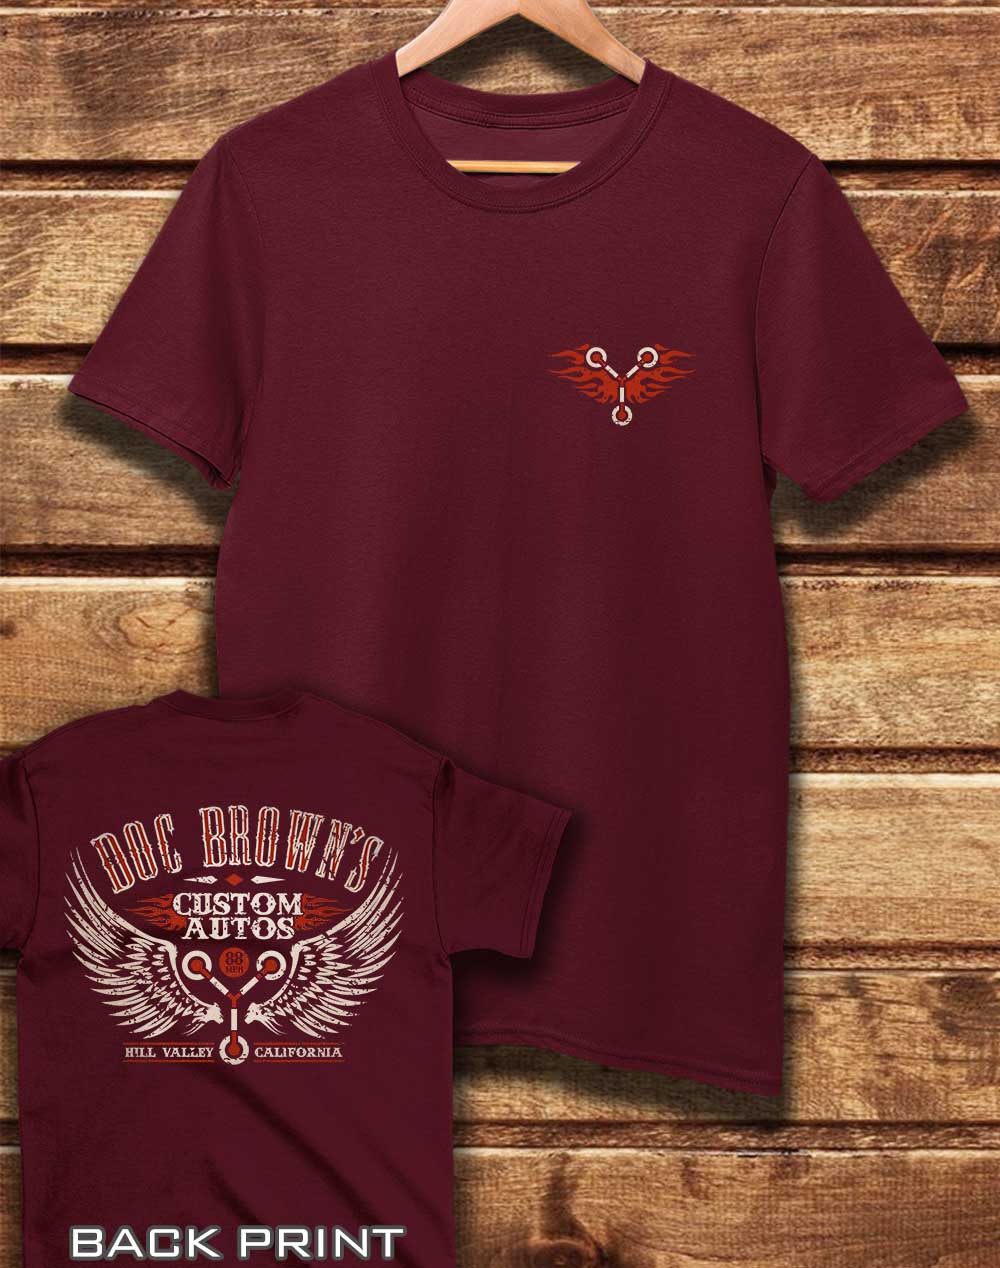 Burgundy - DELUXE Doc Brown's Autos with Back Print Organic Cotton T-Shirt